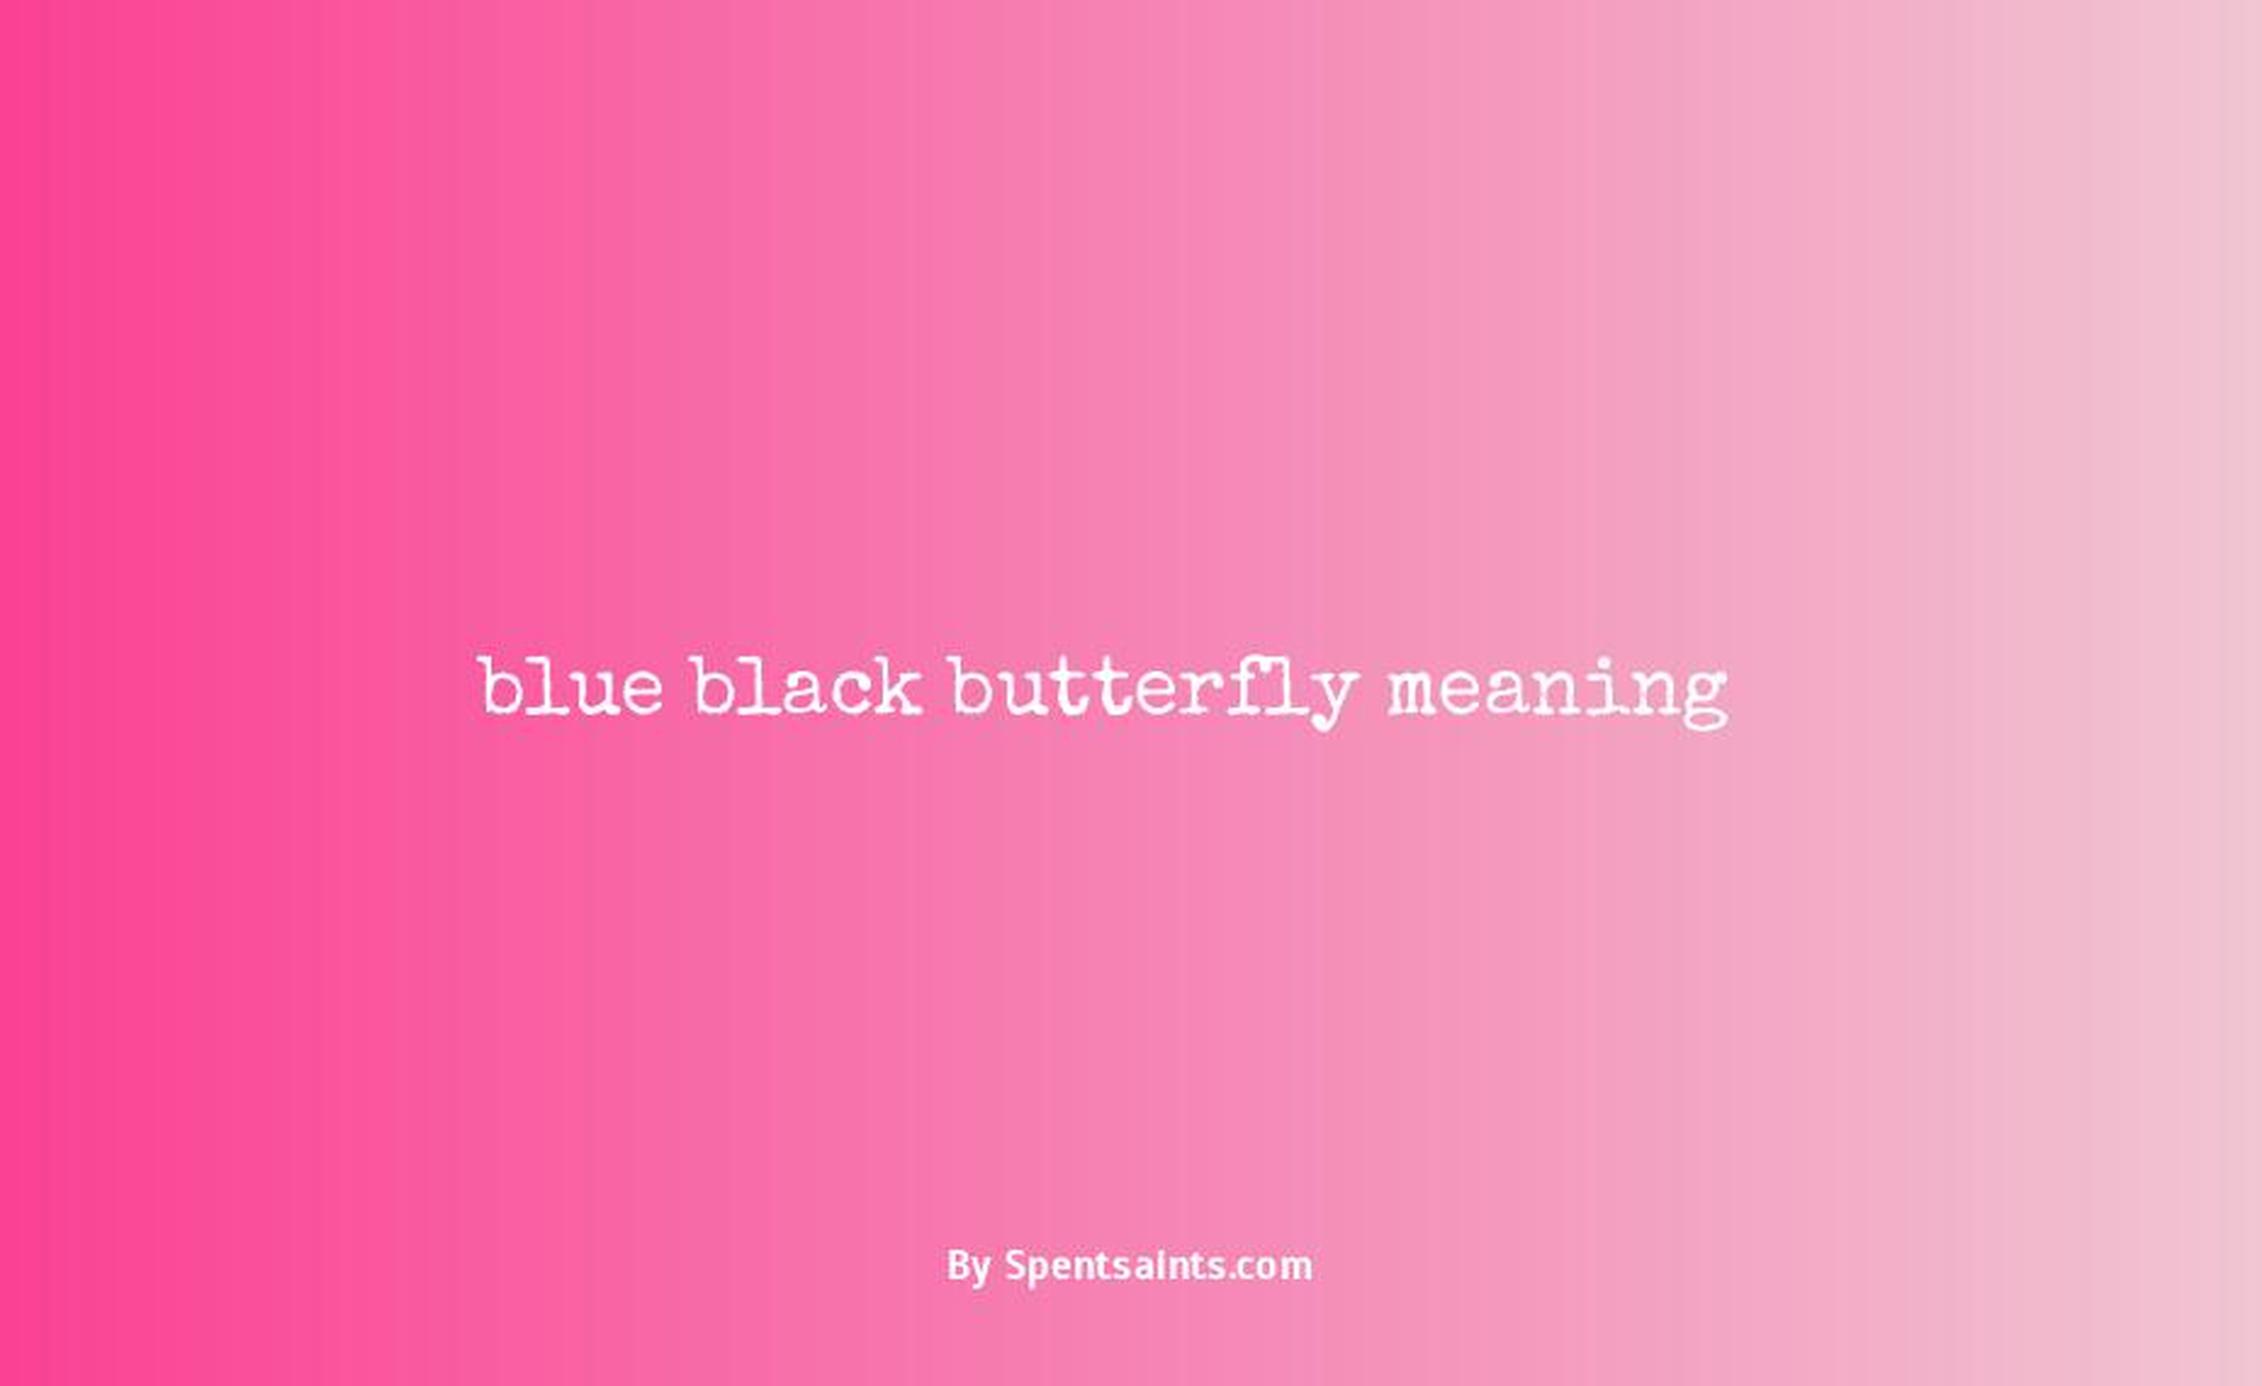 blue black butterfly meaning